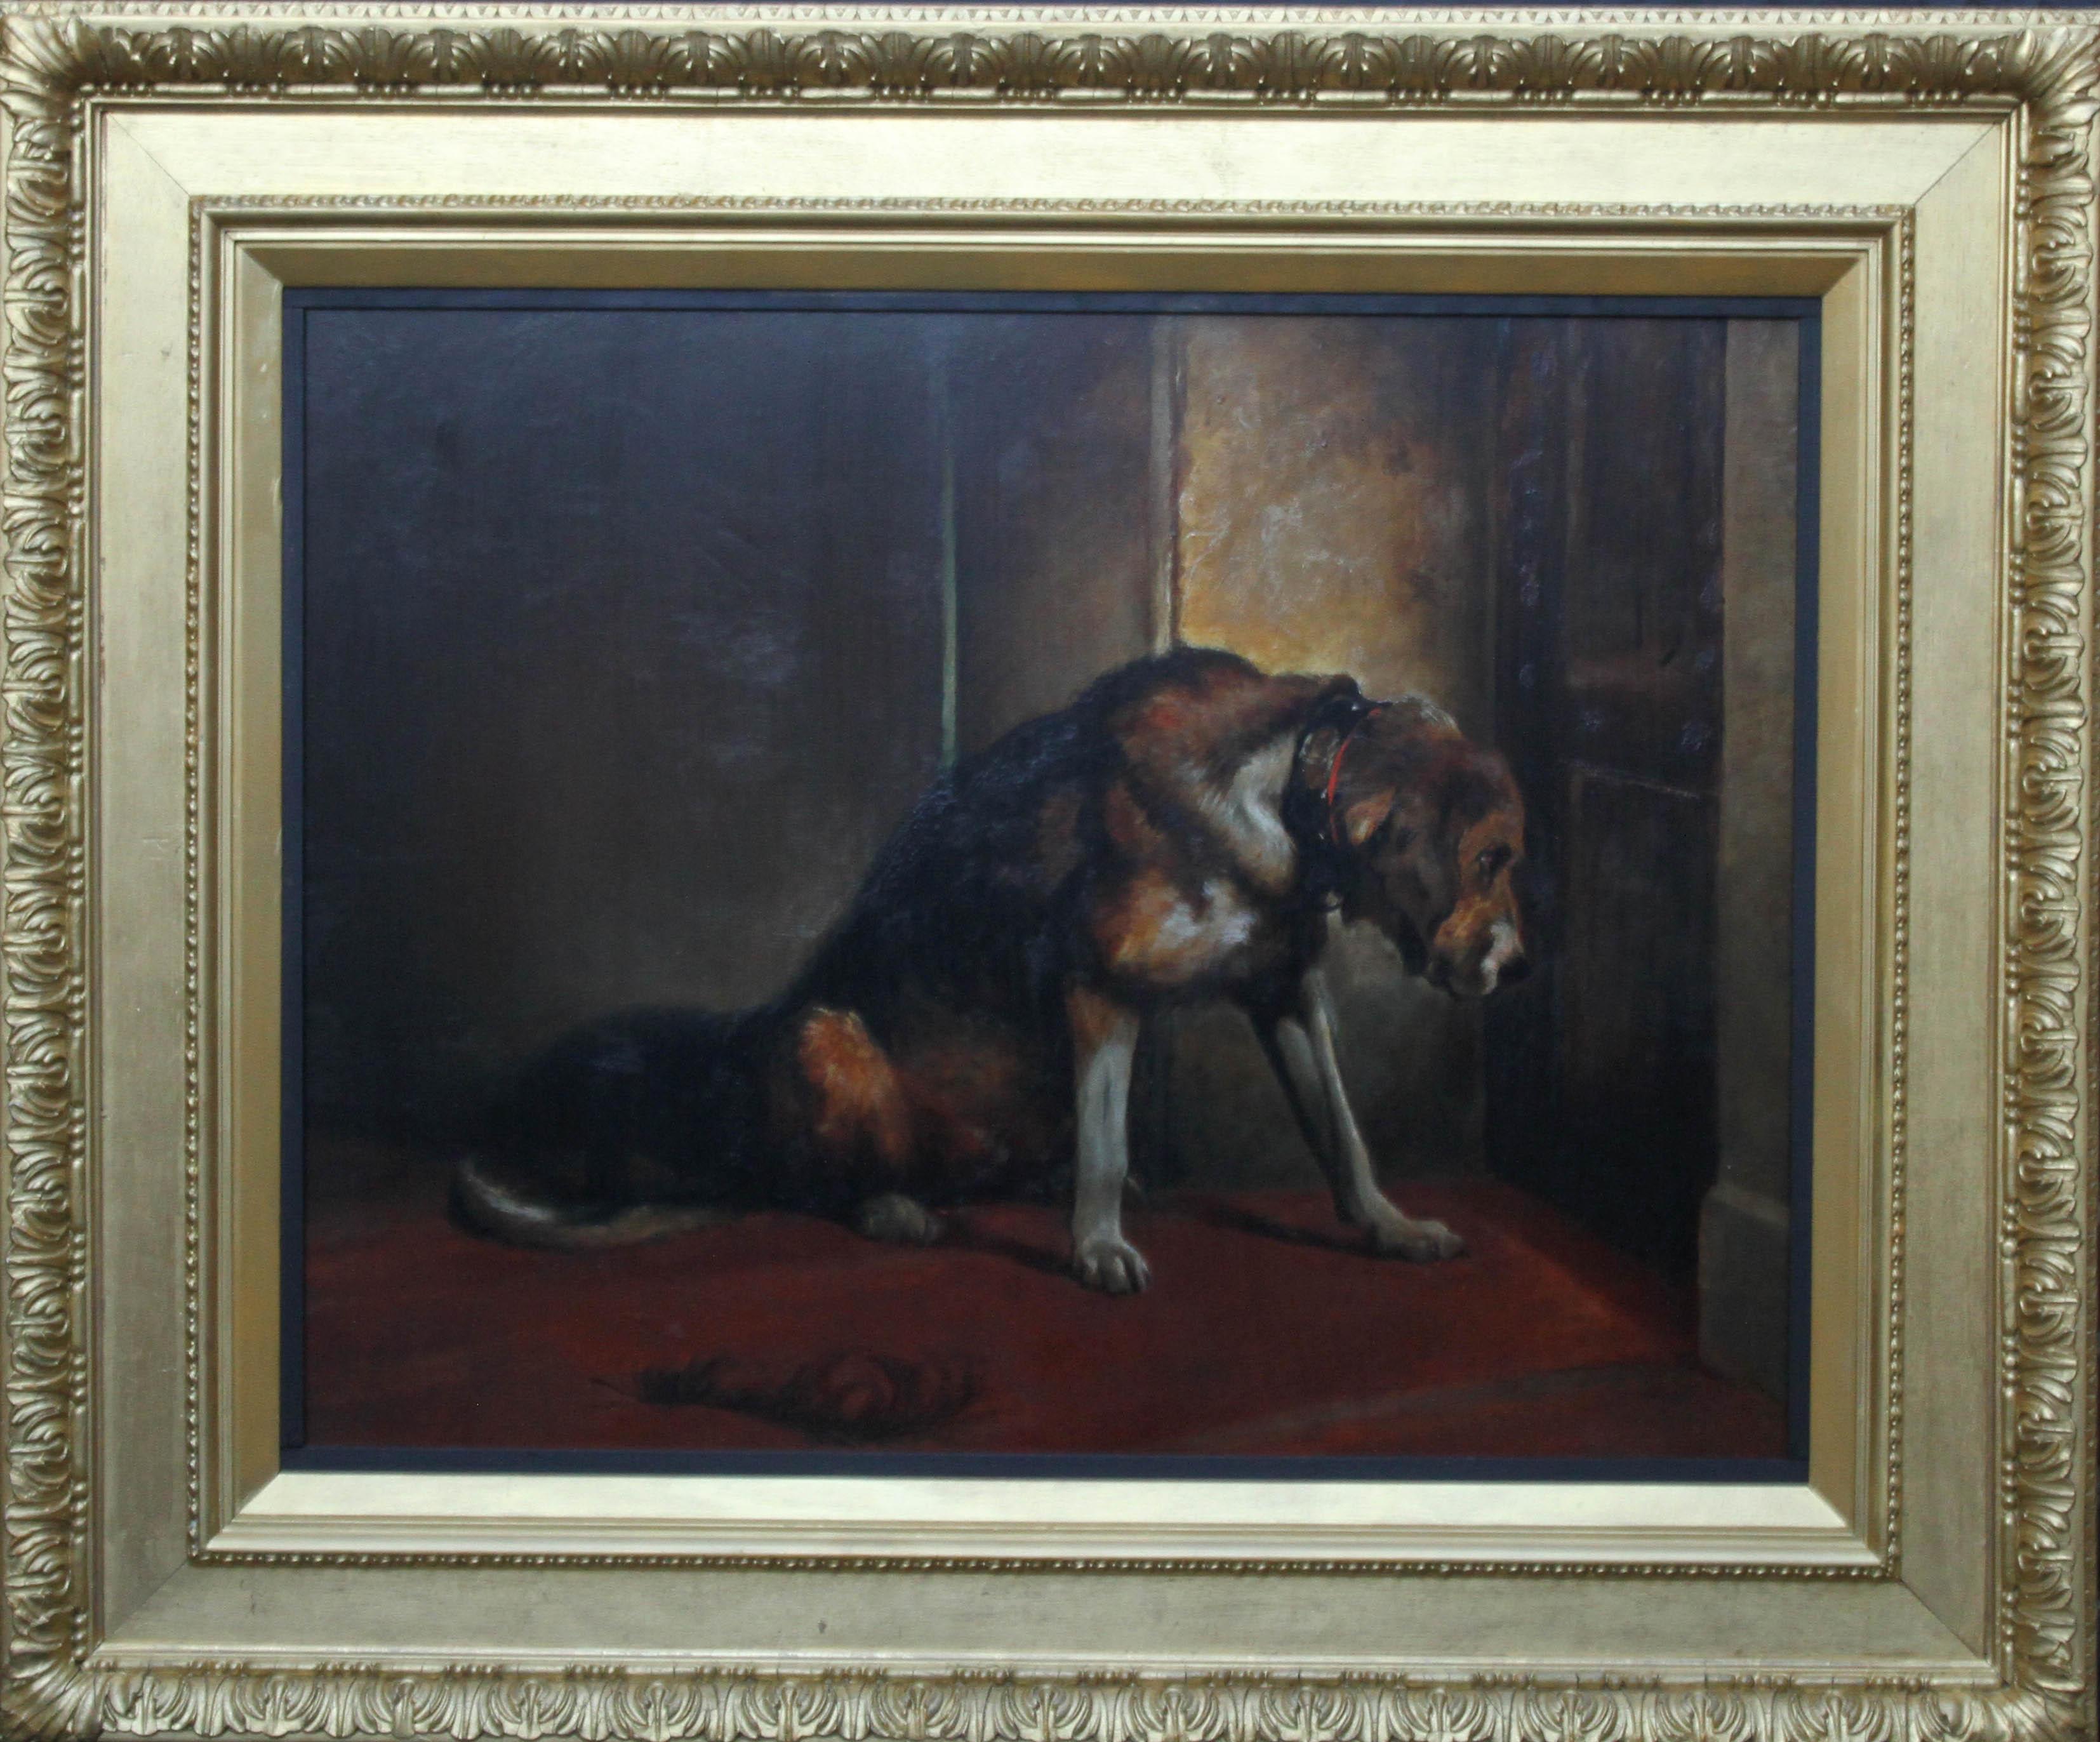 E Stott Animal Painting - Dog Waiting Patiently  - British Victorian art loyal dog portrait oil painting